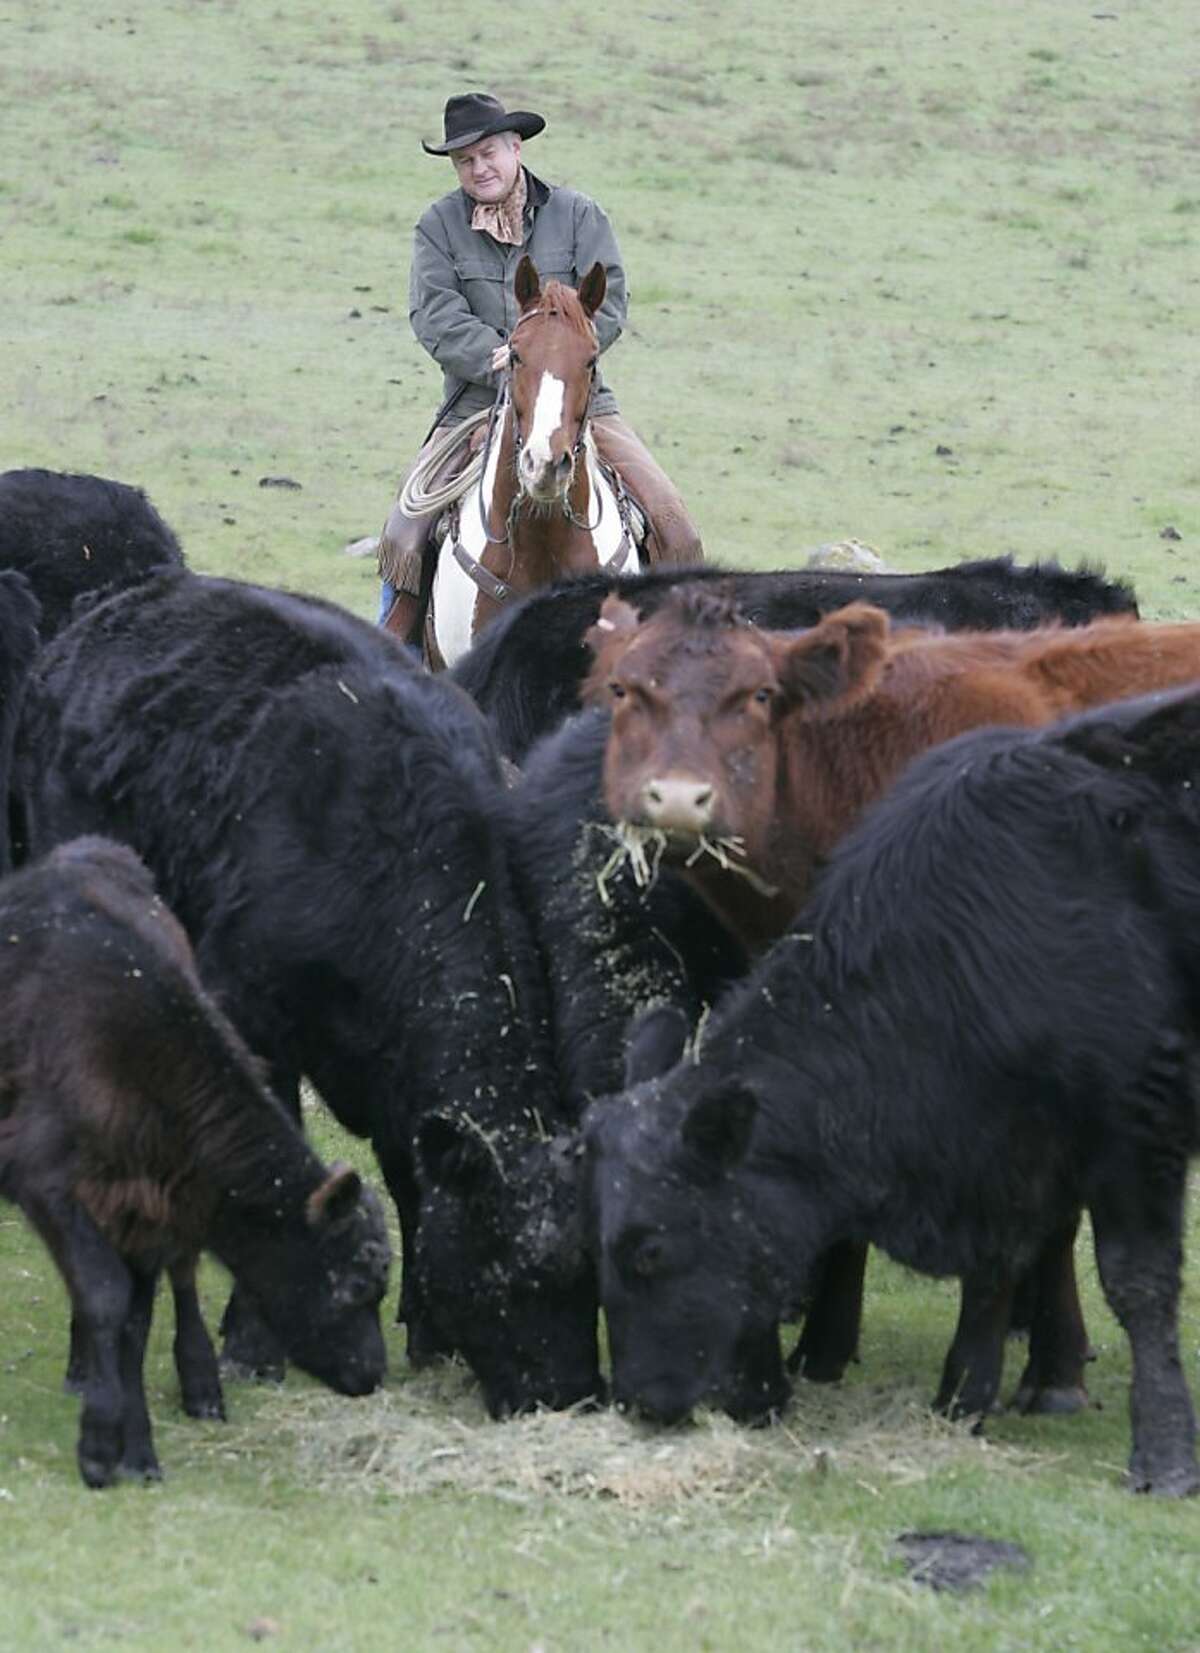 Livermore cattle rancher, Darrel Sweet, the former president of the California Cattlemen's Association looks over some of his herd on his ranch in the hills east of Livermore. Japan and 57 other countries banned U.S. beef on Dec. 24, 2003 after a single case of mad cow disease, or BSE, was found in a dairy cow in Washington State. Some $1.4 billion in exports were lost nationally and the California beef industry lost $60 million, as Japan is our number one importer of beef. Now, there's light at the end of the tunnel as Japan and the U.S. have negotiated an agreement that U.S. beef can enter the market if it comes from cattle 20 month of age or younger. It's possible exports will resume in the spring or summer.